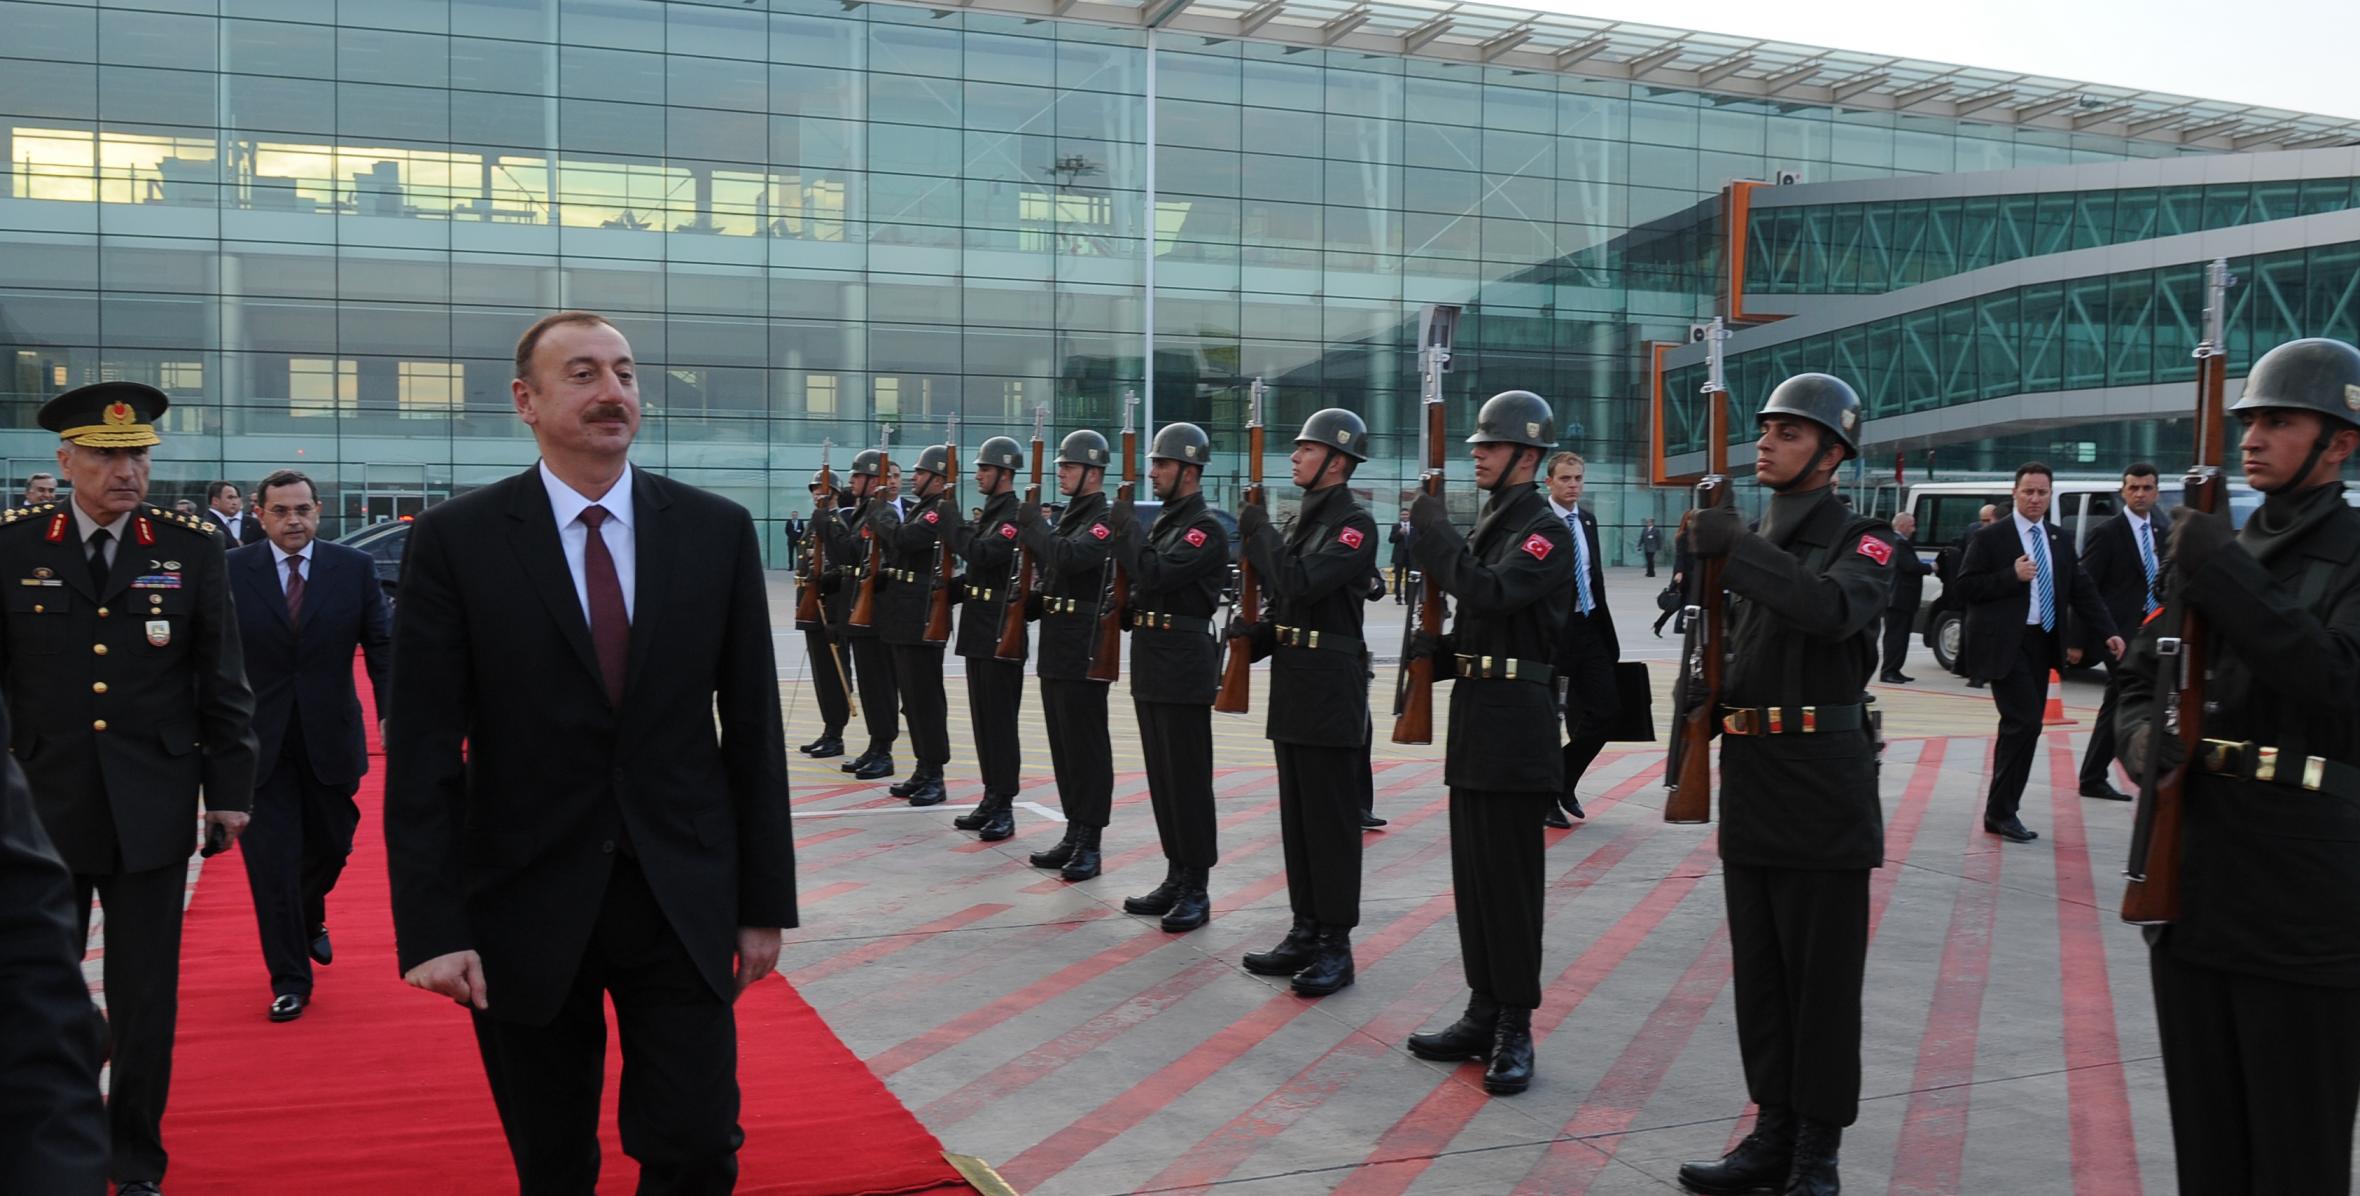 Ilham Aliyev’s visit to the Republic of Turkey ended